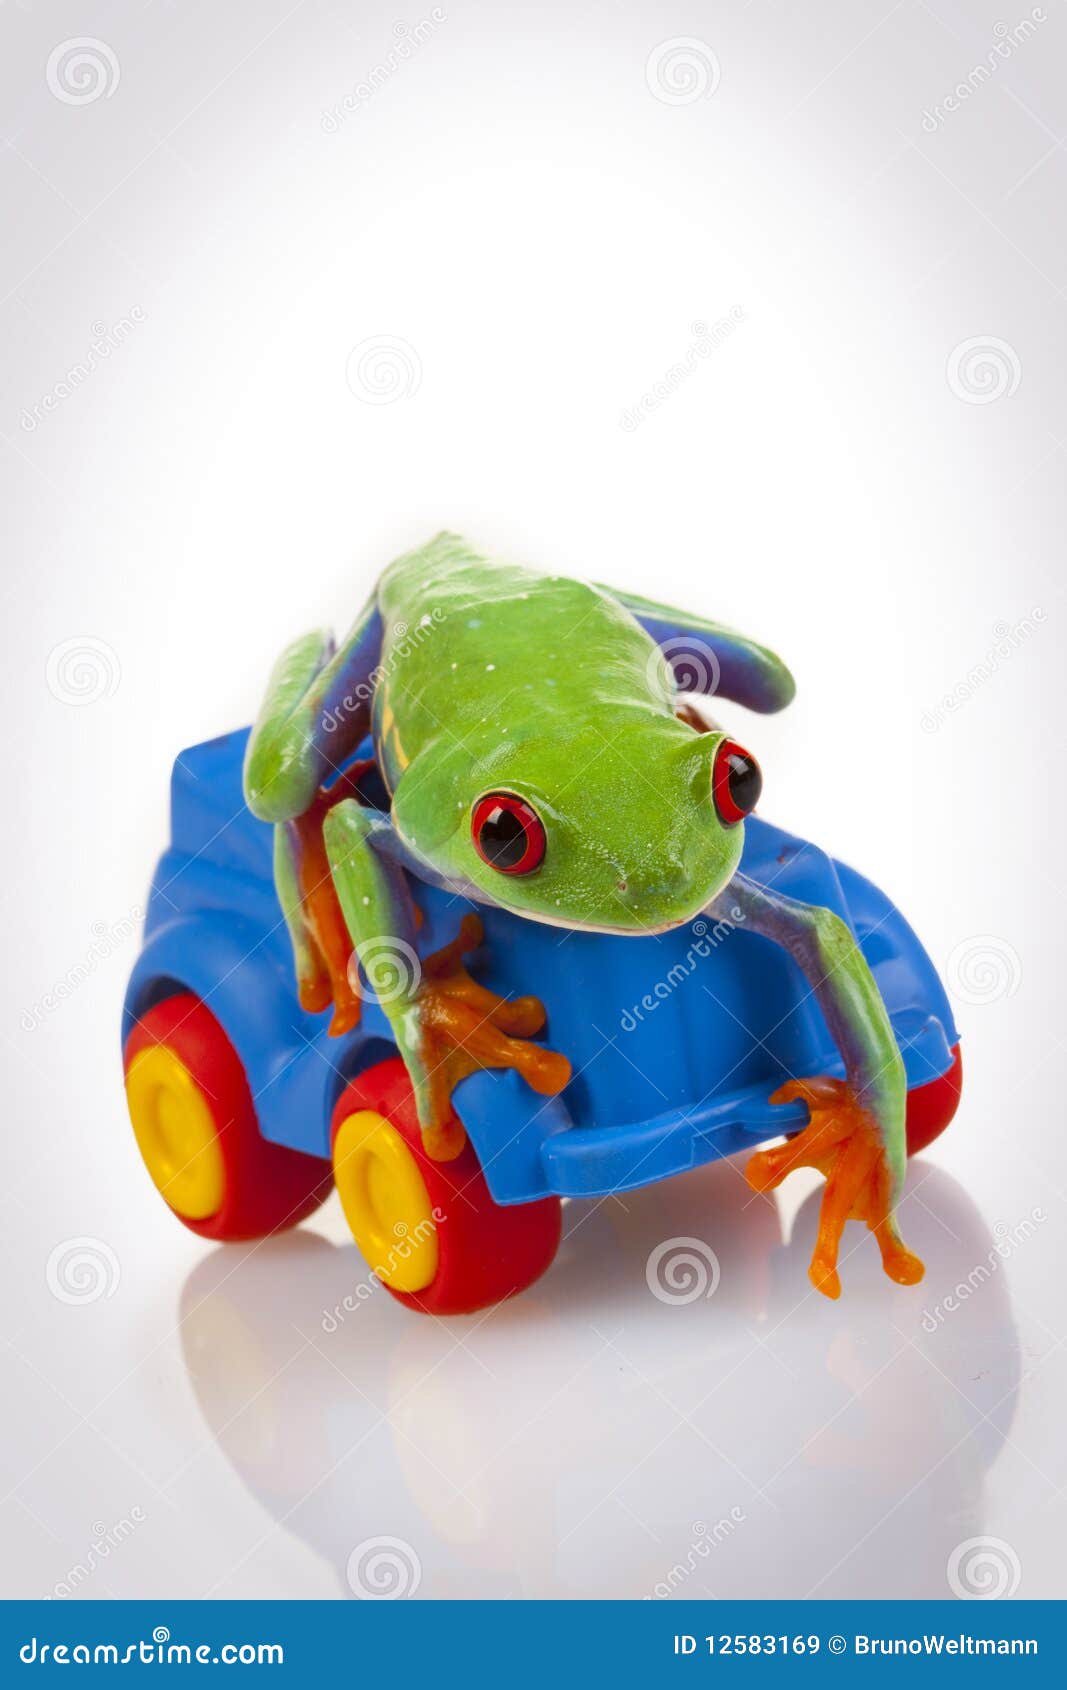 Toy and Frog stock image. Image of animals, sitting, dark - 12583169